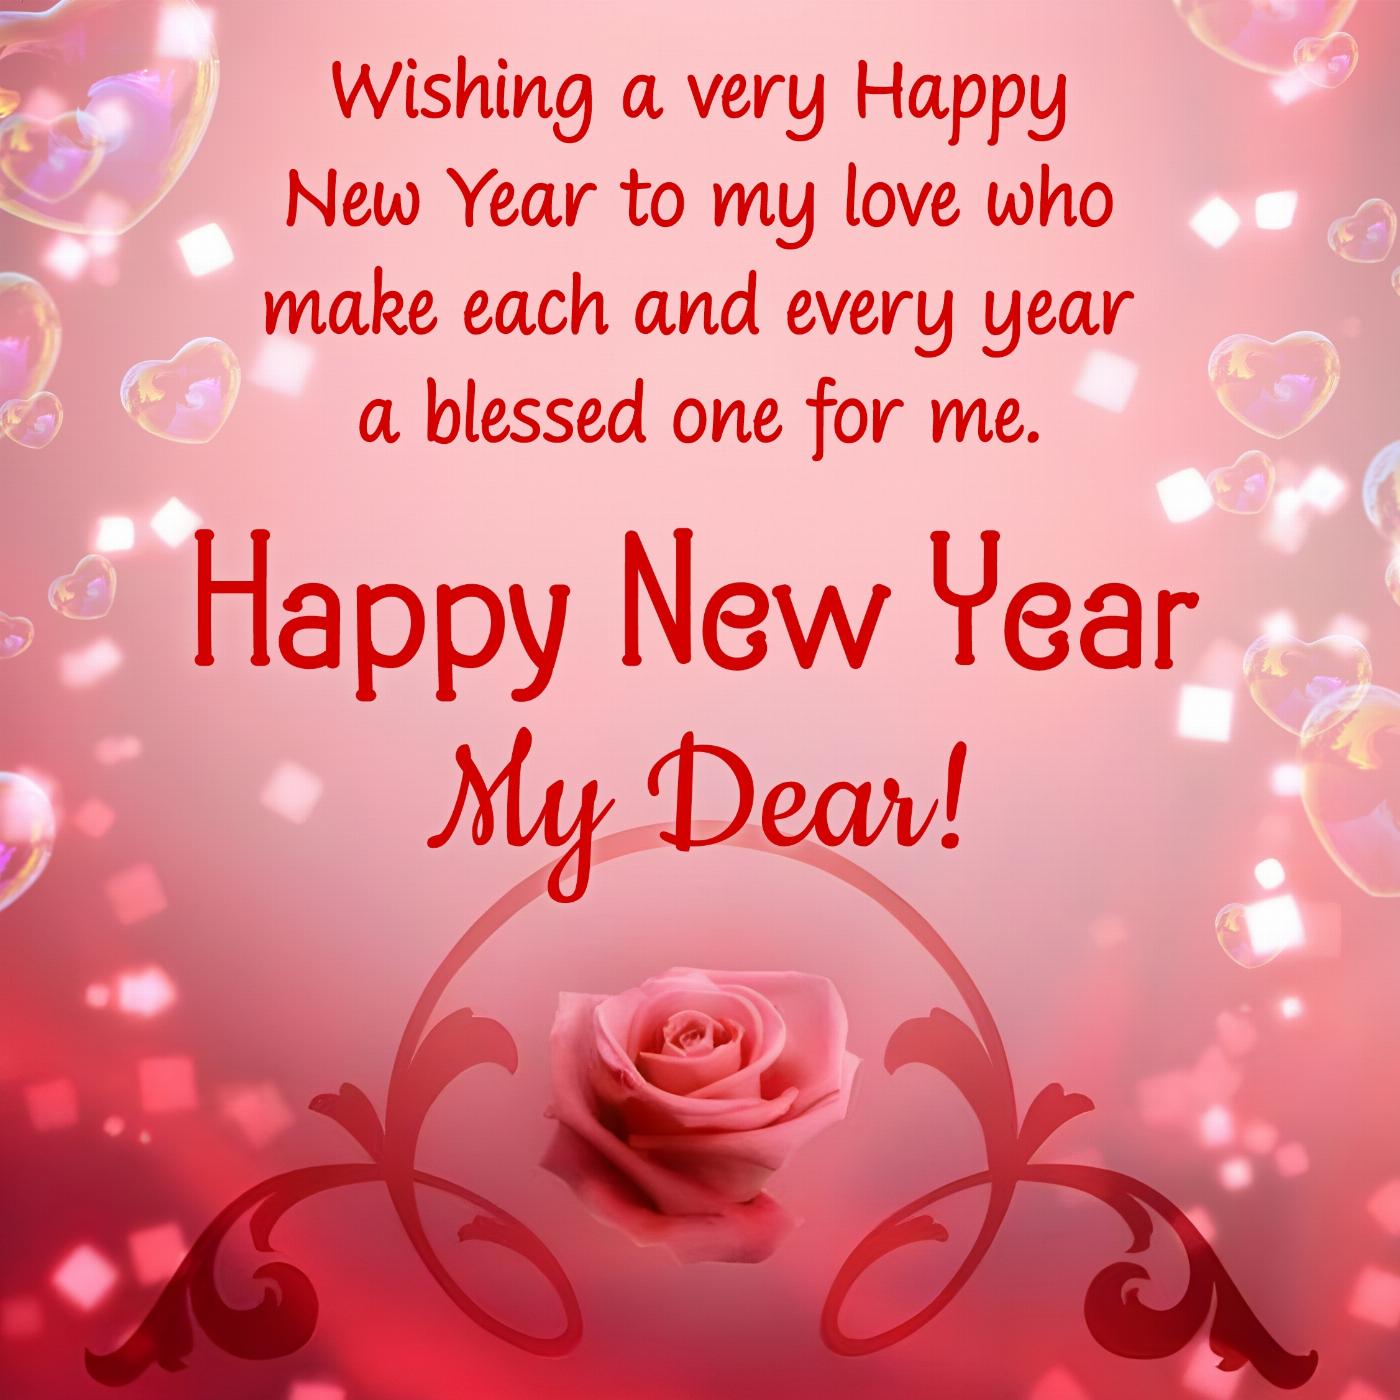 Wishing a very Happy New Year to my love